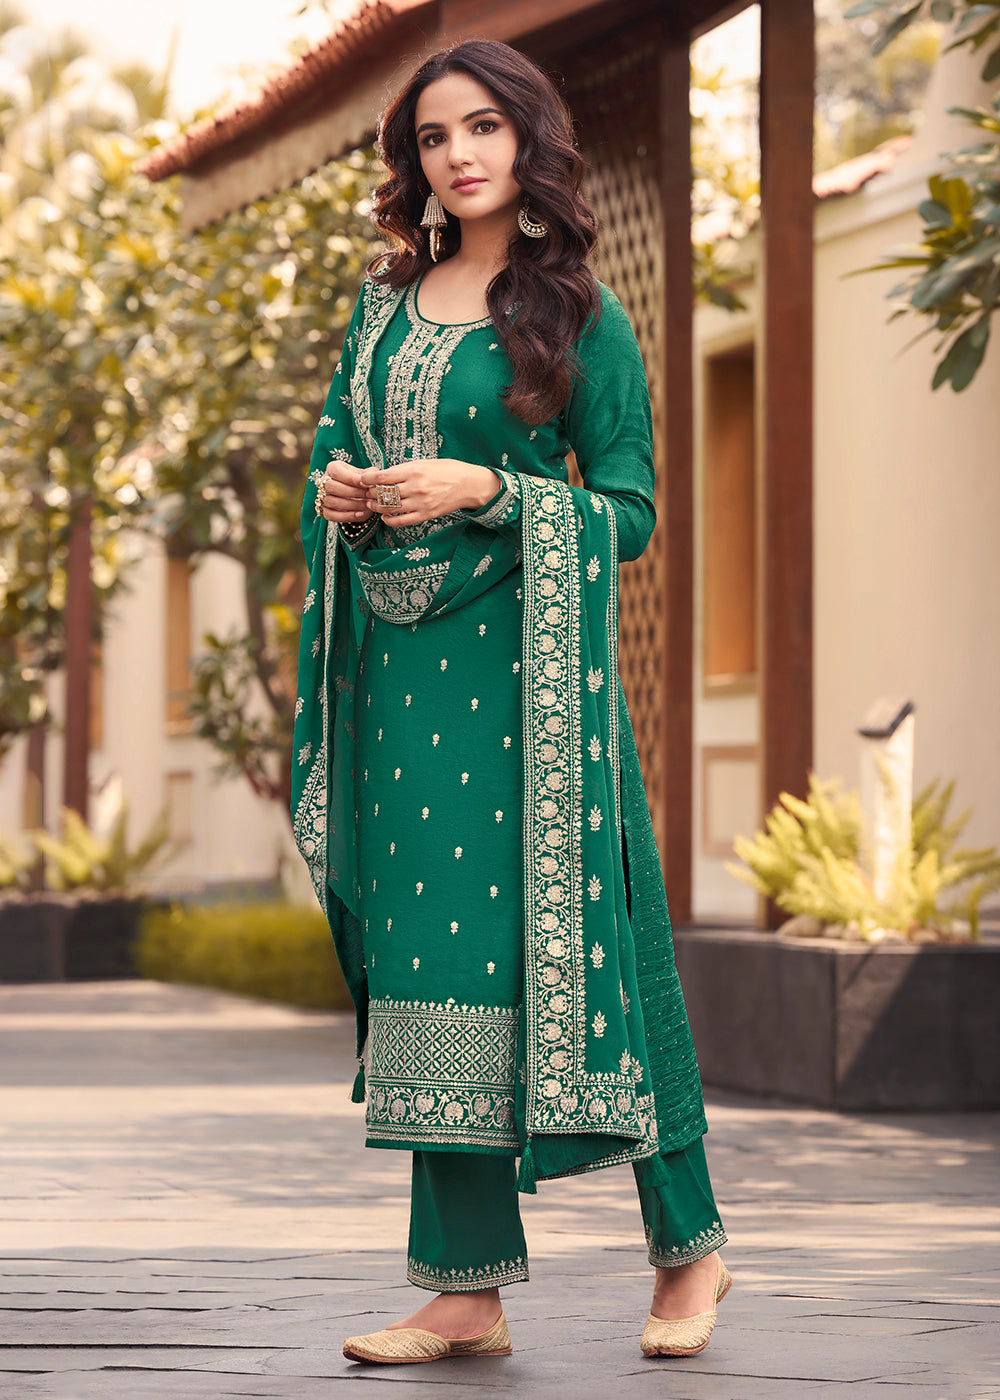 Buy Now Dola Silk Vivacious Green Embroidered Festive Salwar Suit Online in USA, UK, Canada, Germany, Australia & Worldwide at Empress Clothing.